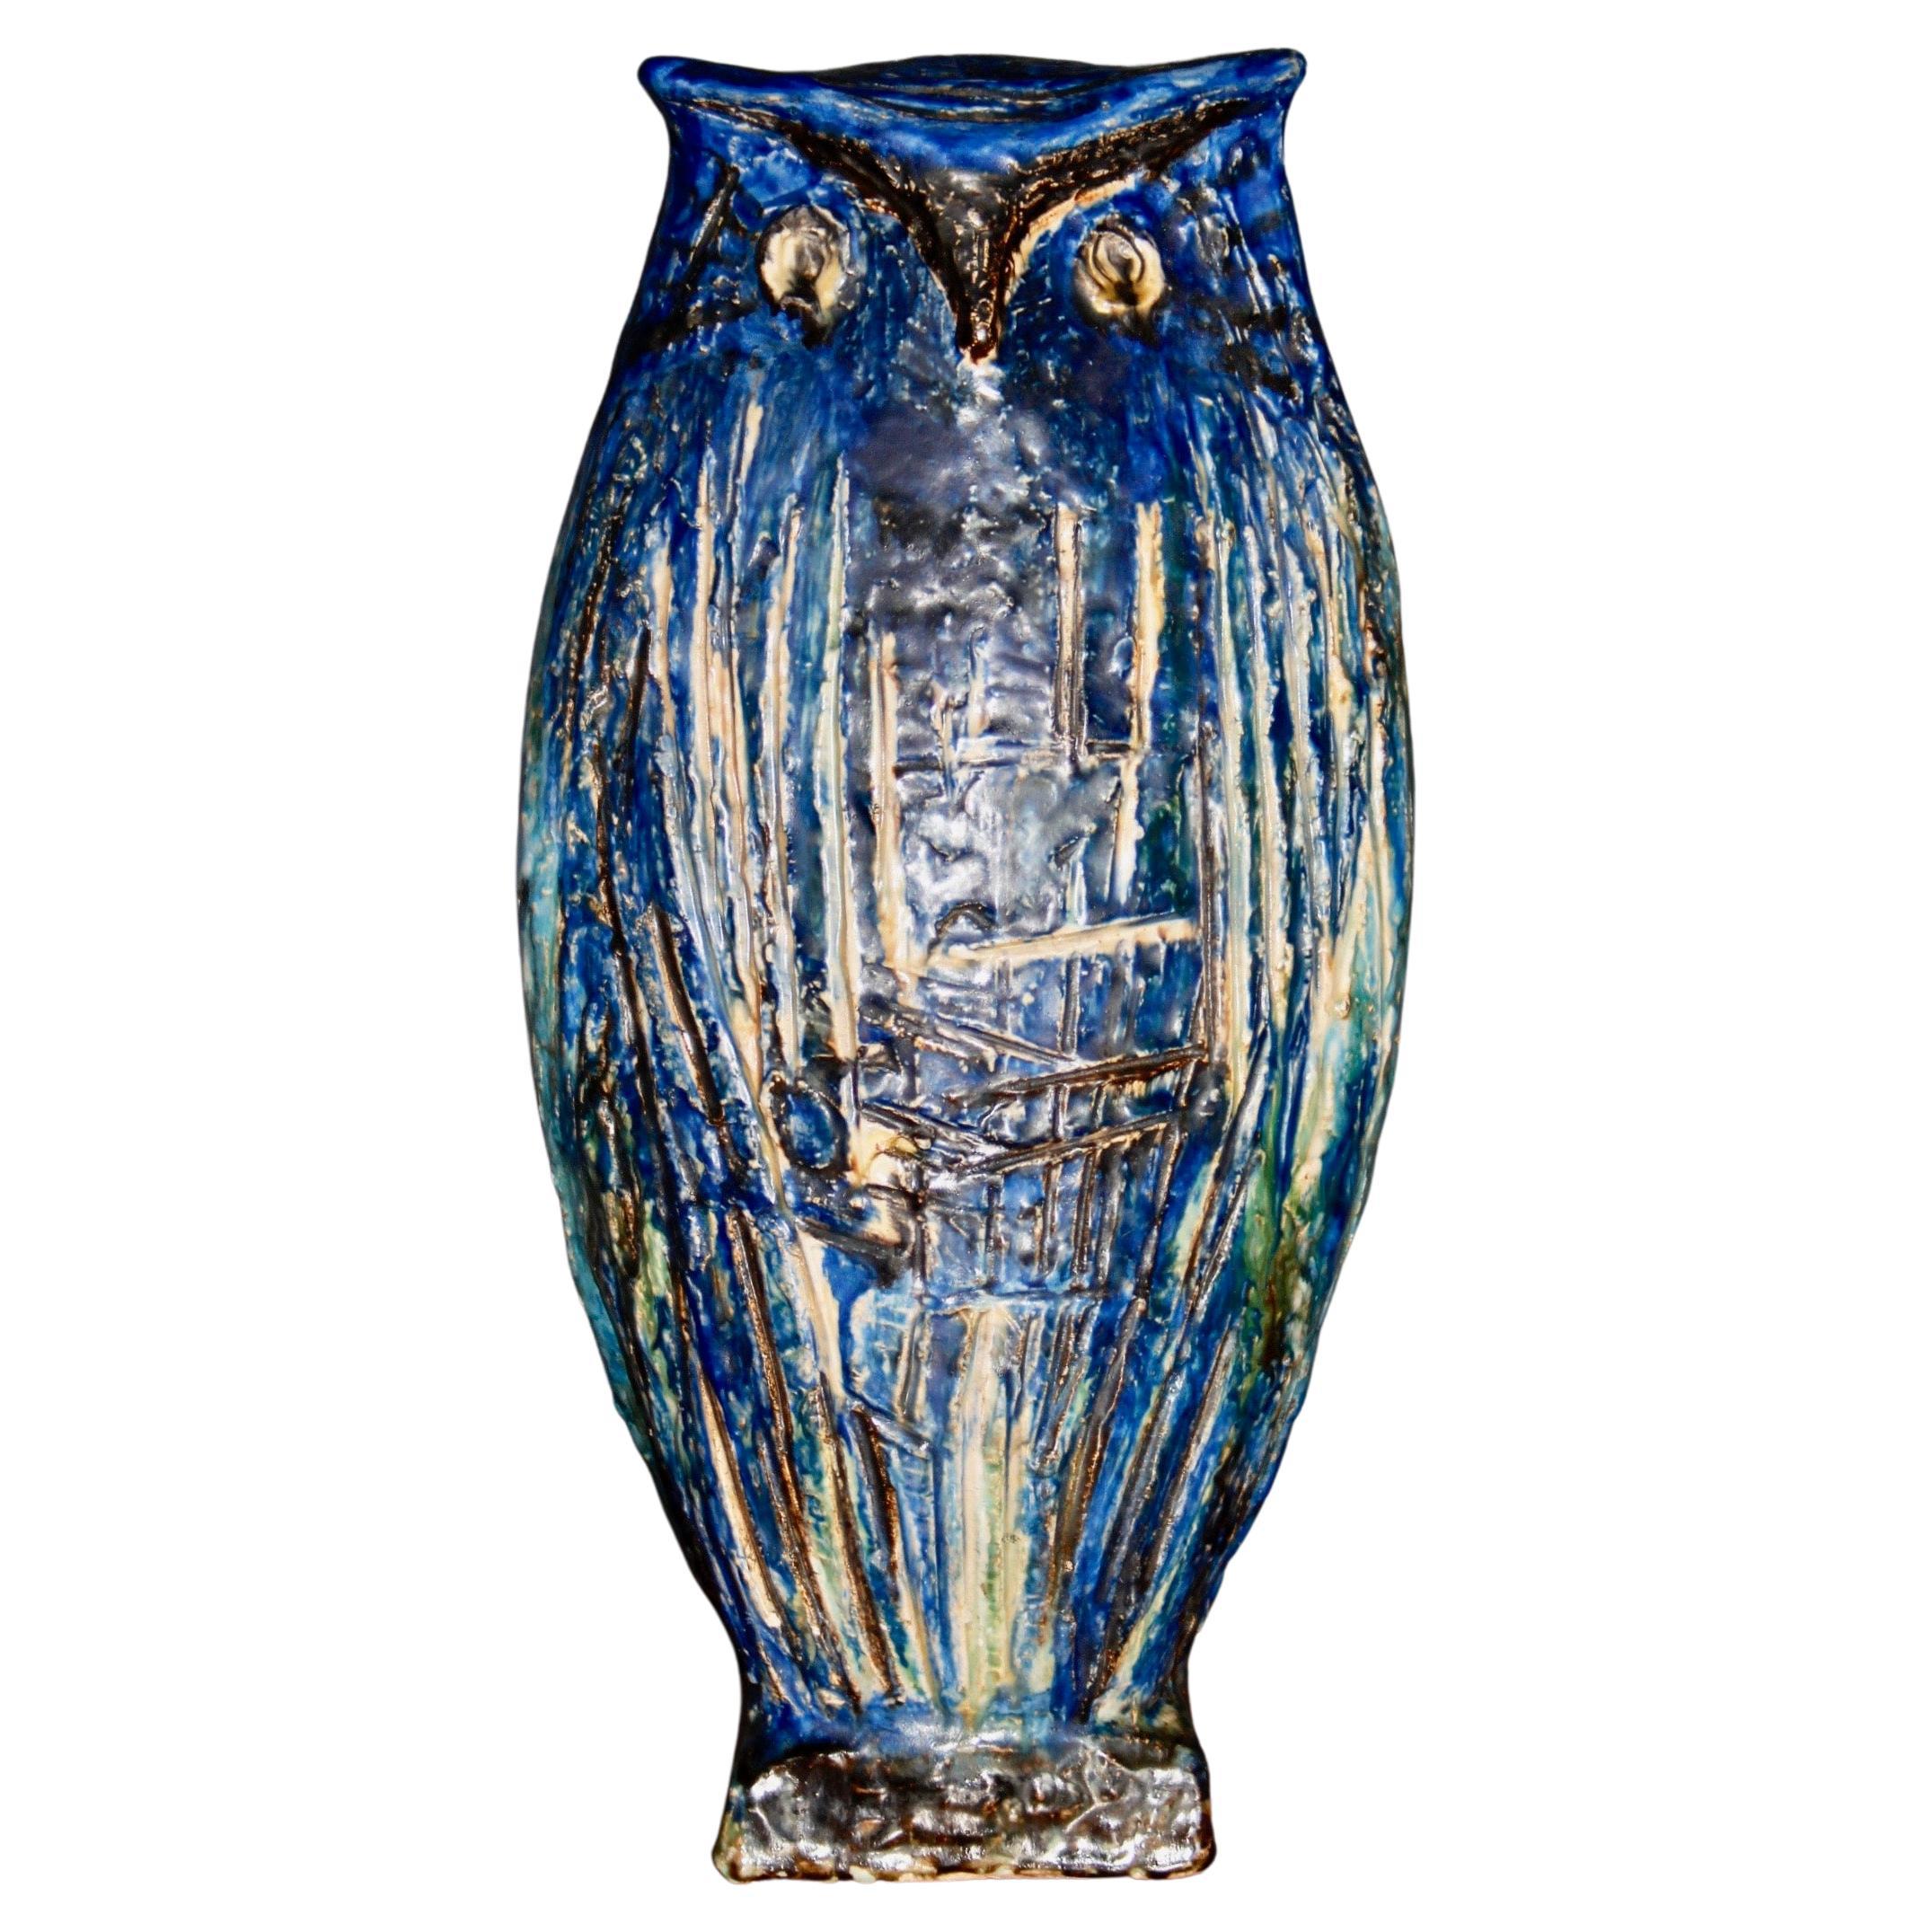 Brown Owl Shaped Vase Handpainted Ceramic 9" Tall for sale online 